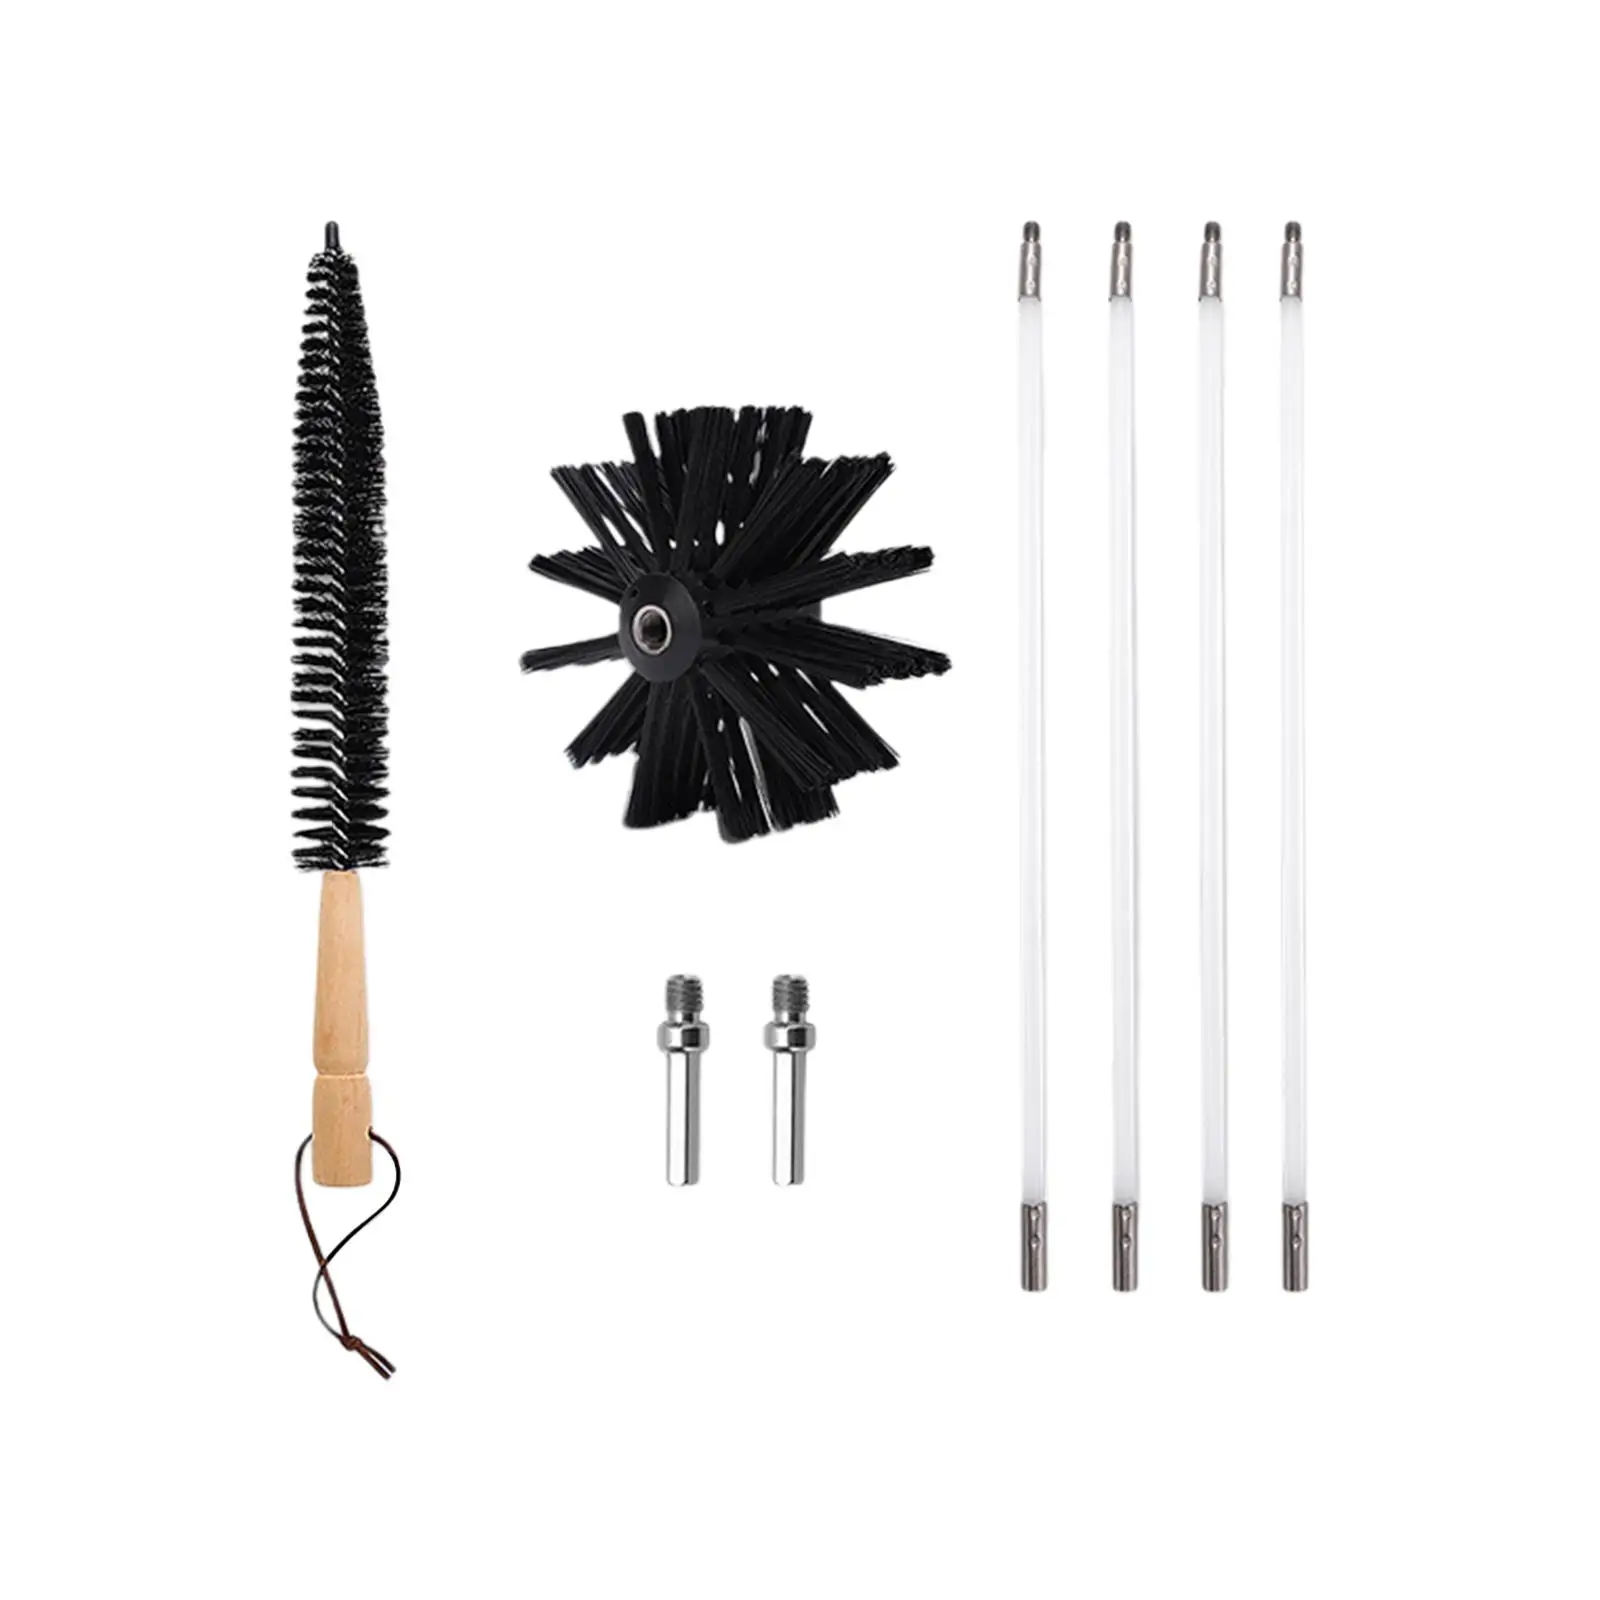 Dry Duct Cleaning Kit Flexible 4 Rods Heat Resistant Nylon Brush Accessories